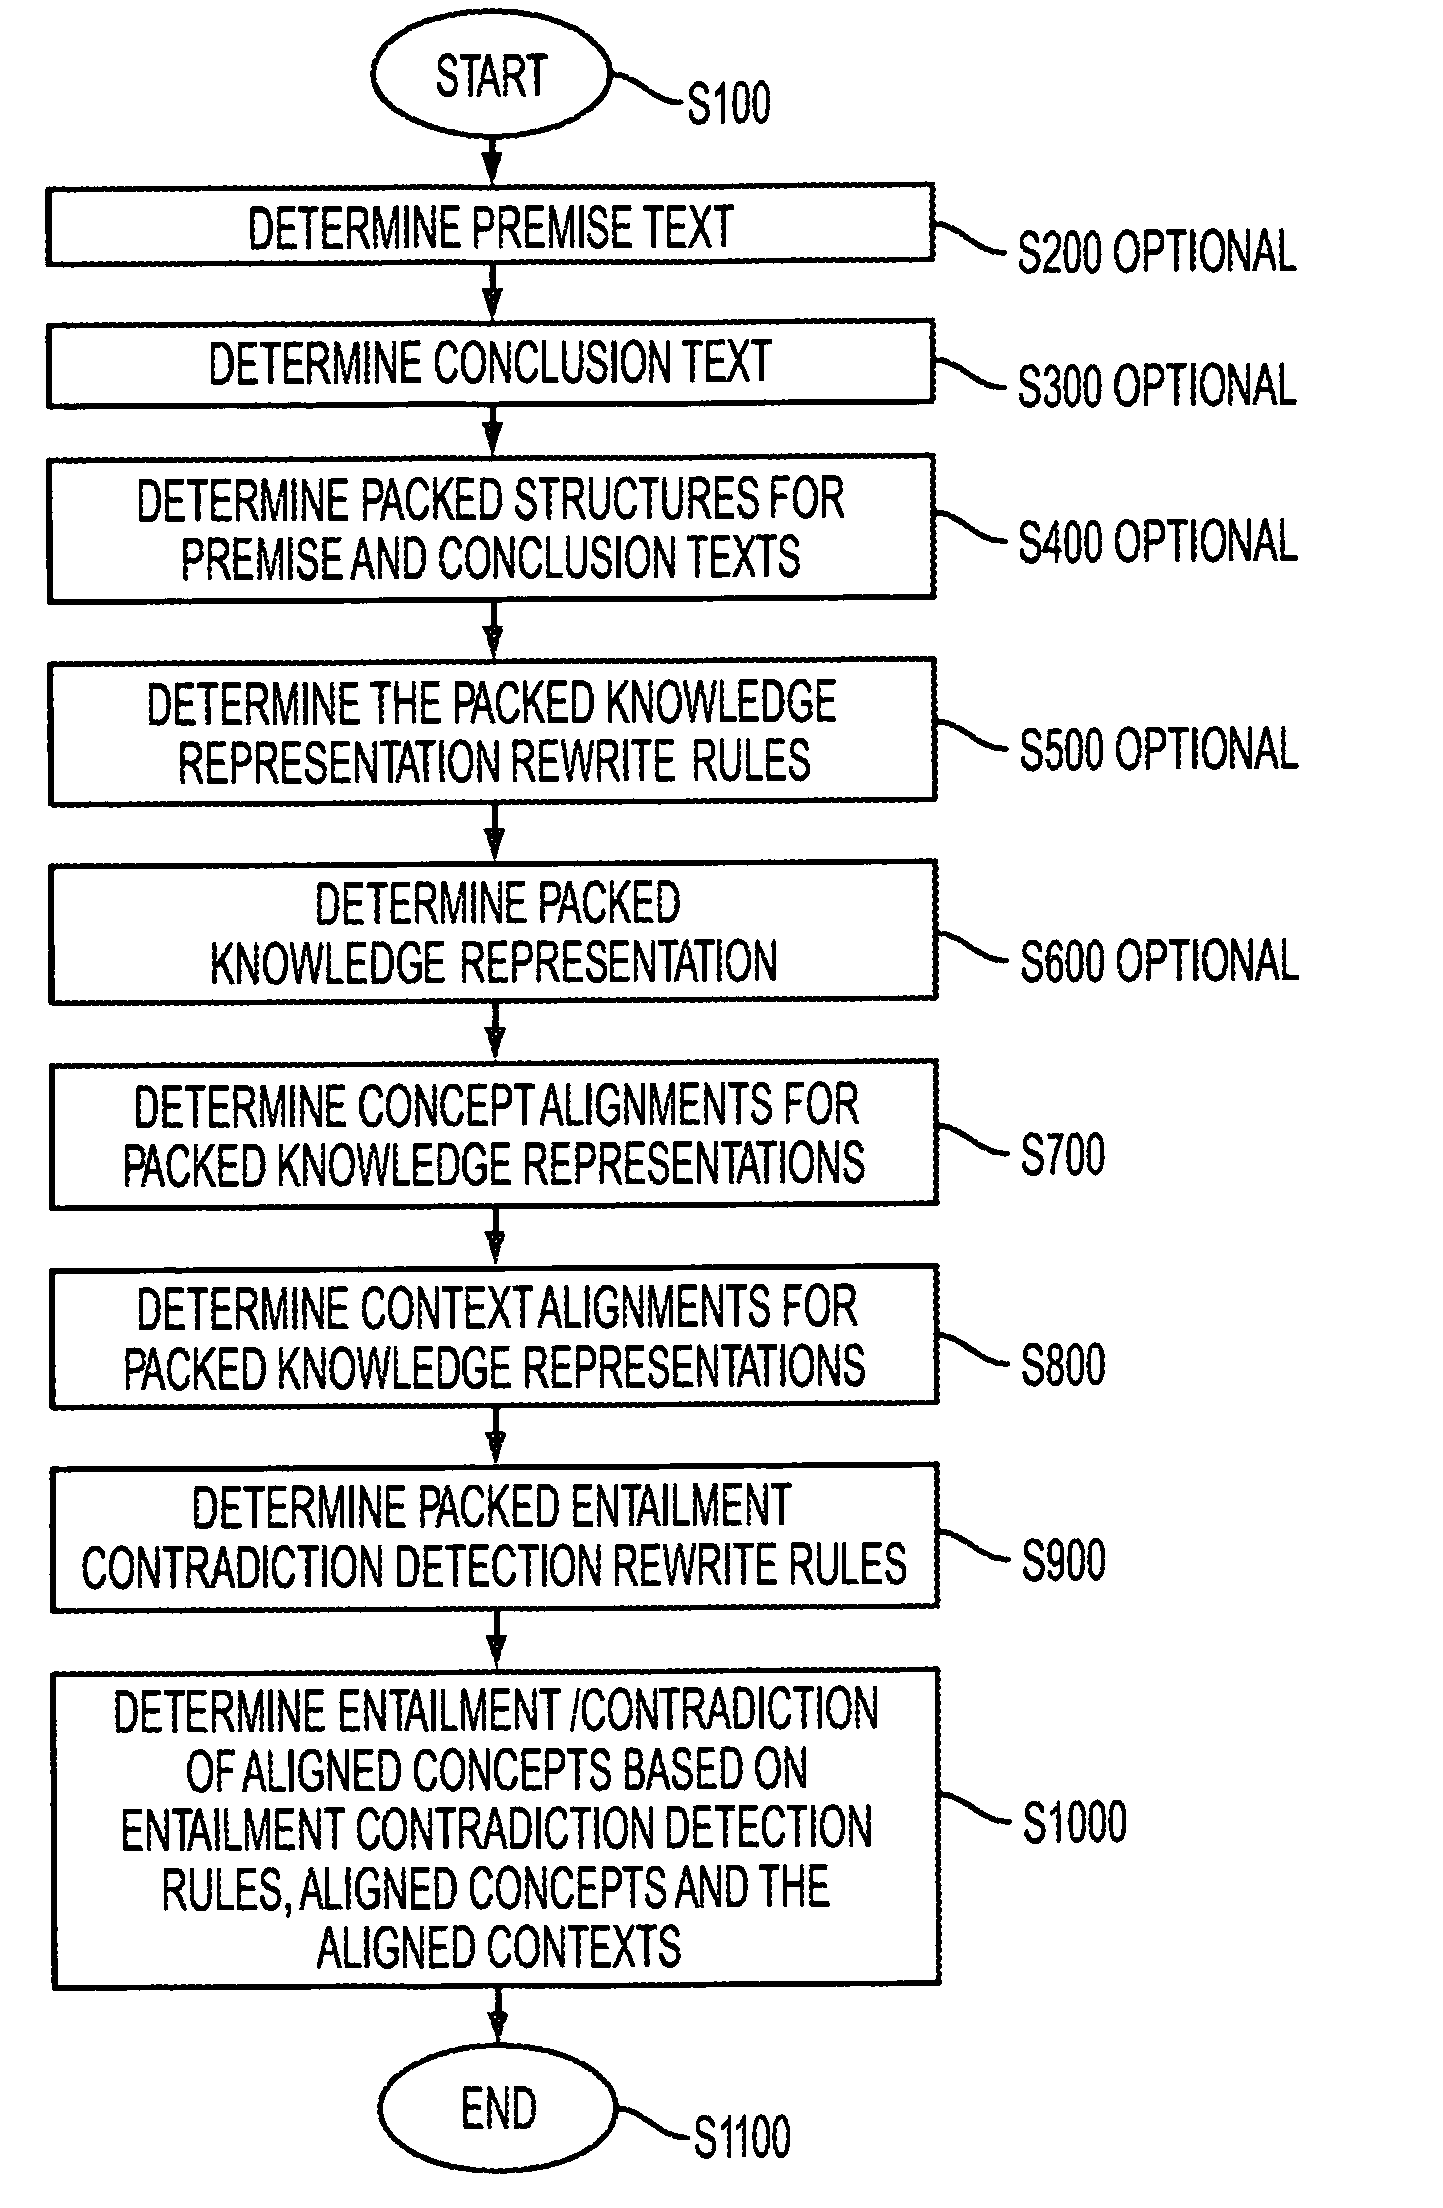 Systems and methods for detecting entailment and contradiction